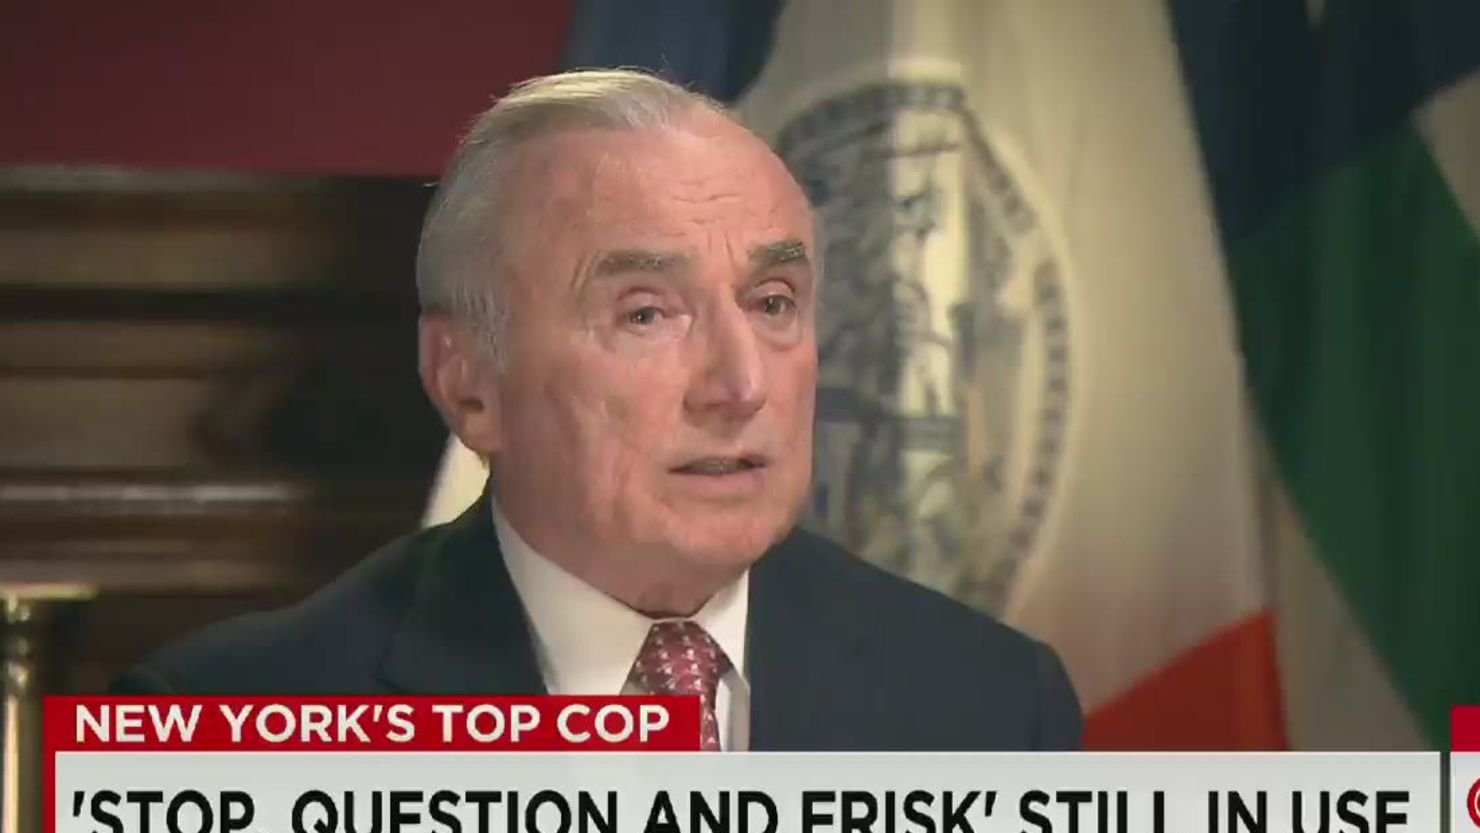 New York City Police Commissioner William Bratton says 86% of his officers had no complaints against them.